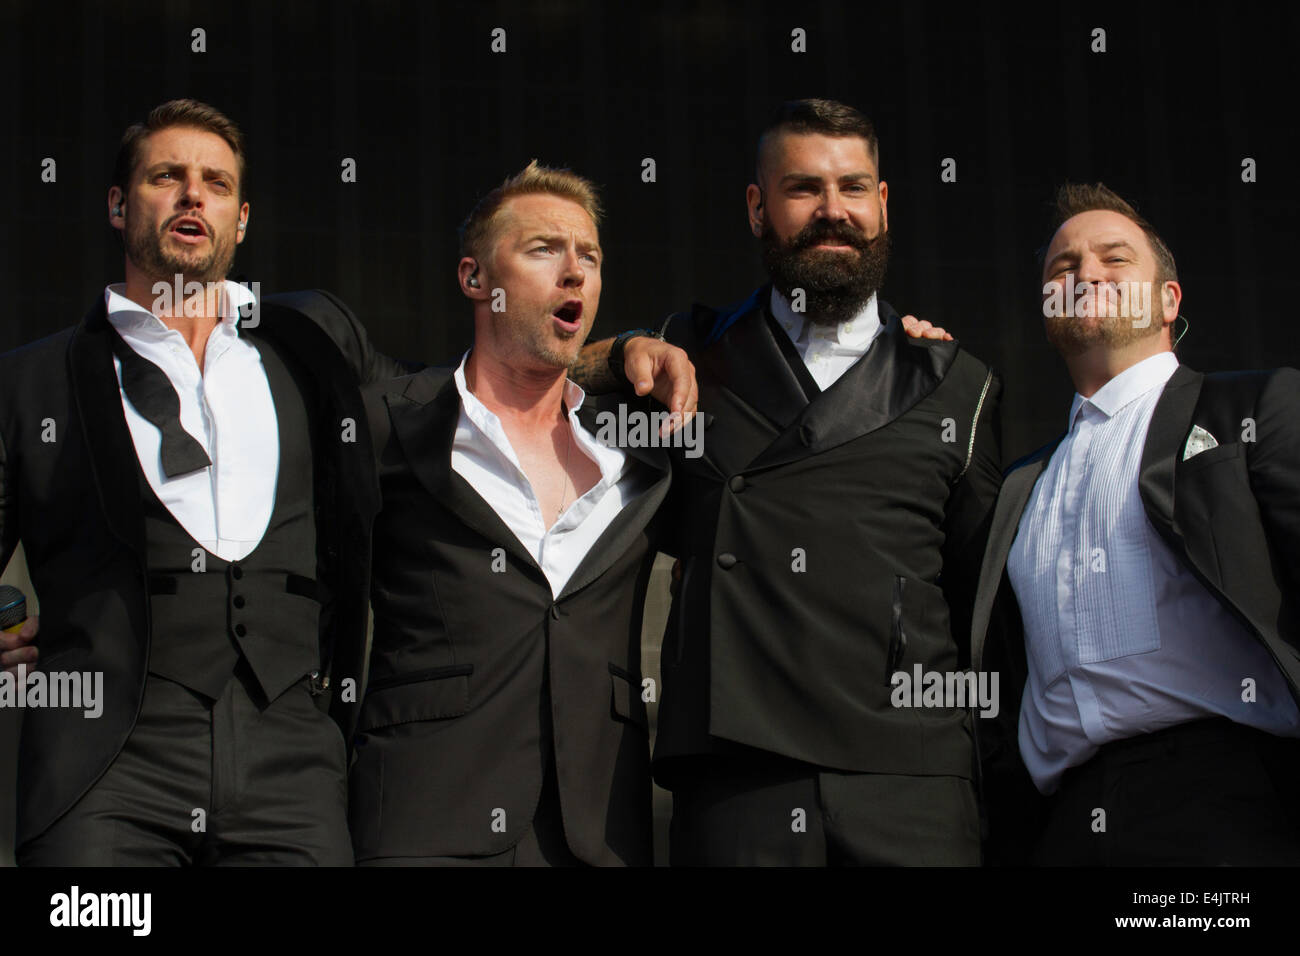 LONDON, ENGLAND - JULY 13: (l-r) Keith Duffy, Ronan Keating, Shane Lynch and Mikey Graham of Boyzone perform on stage at British Stock Photo